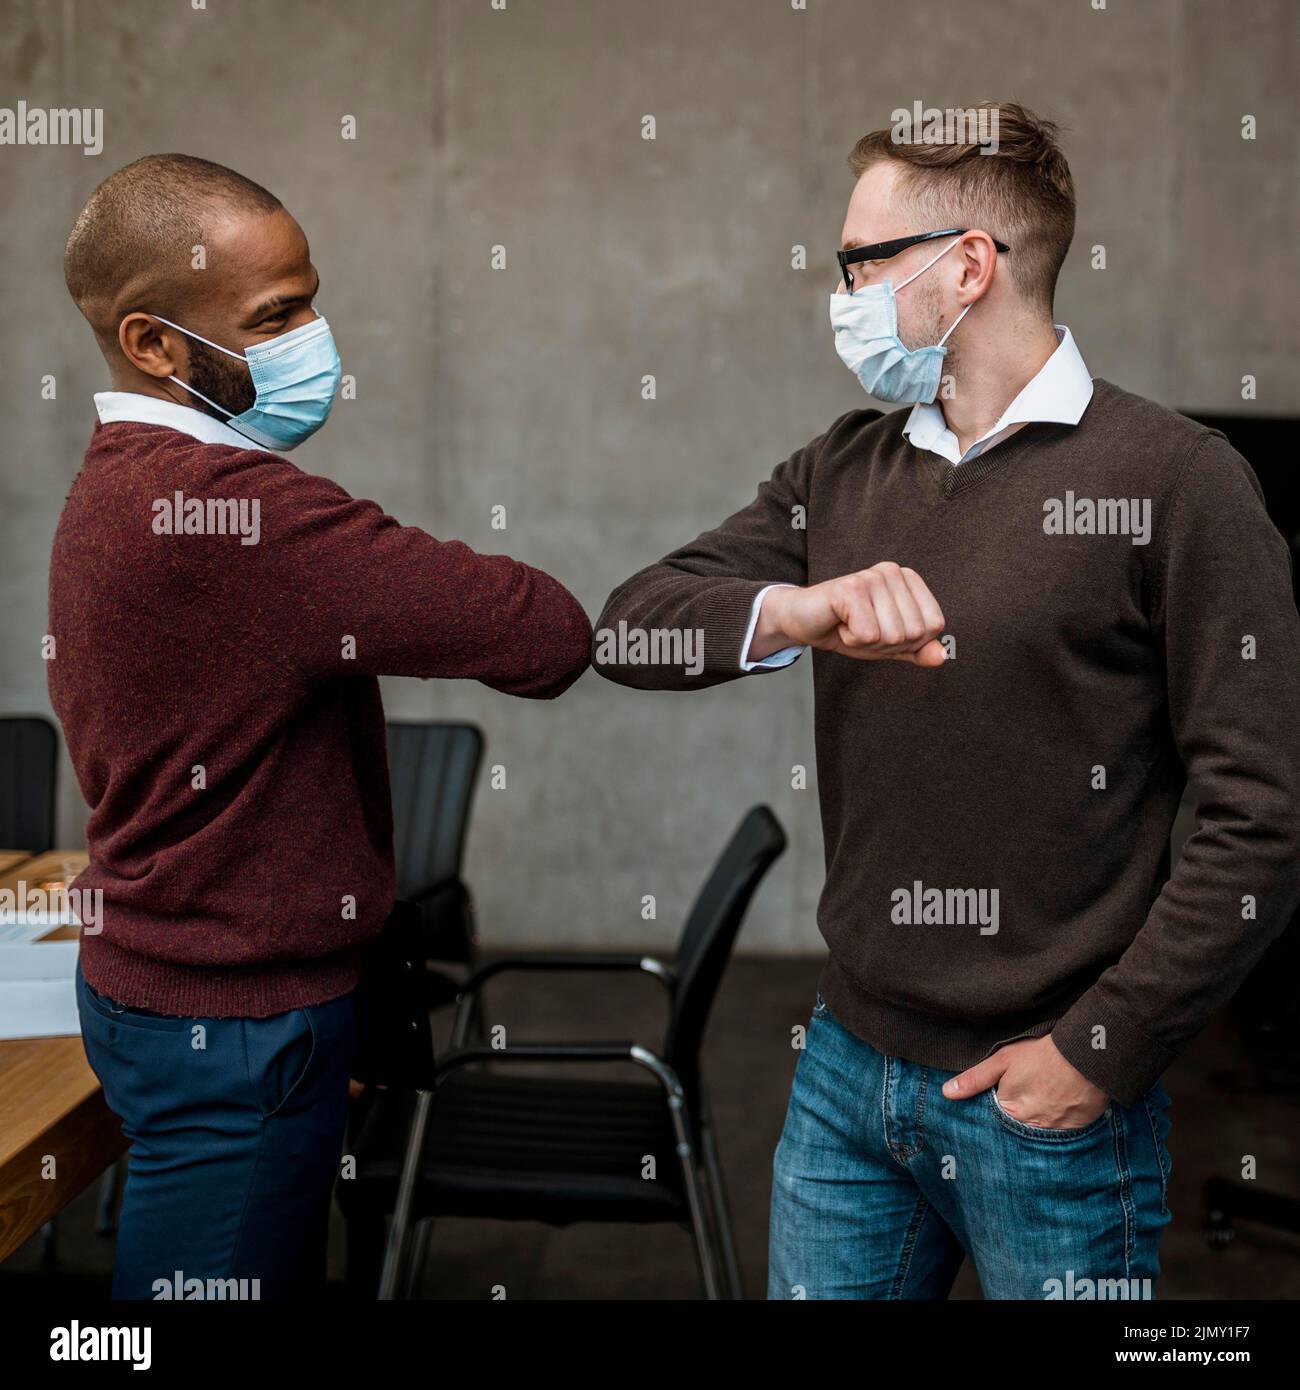 Side view men elbow saluting each other during meeting wearing medical masks Stock Photo